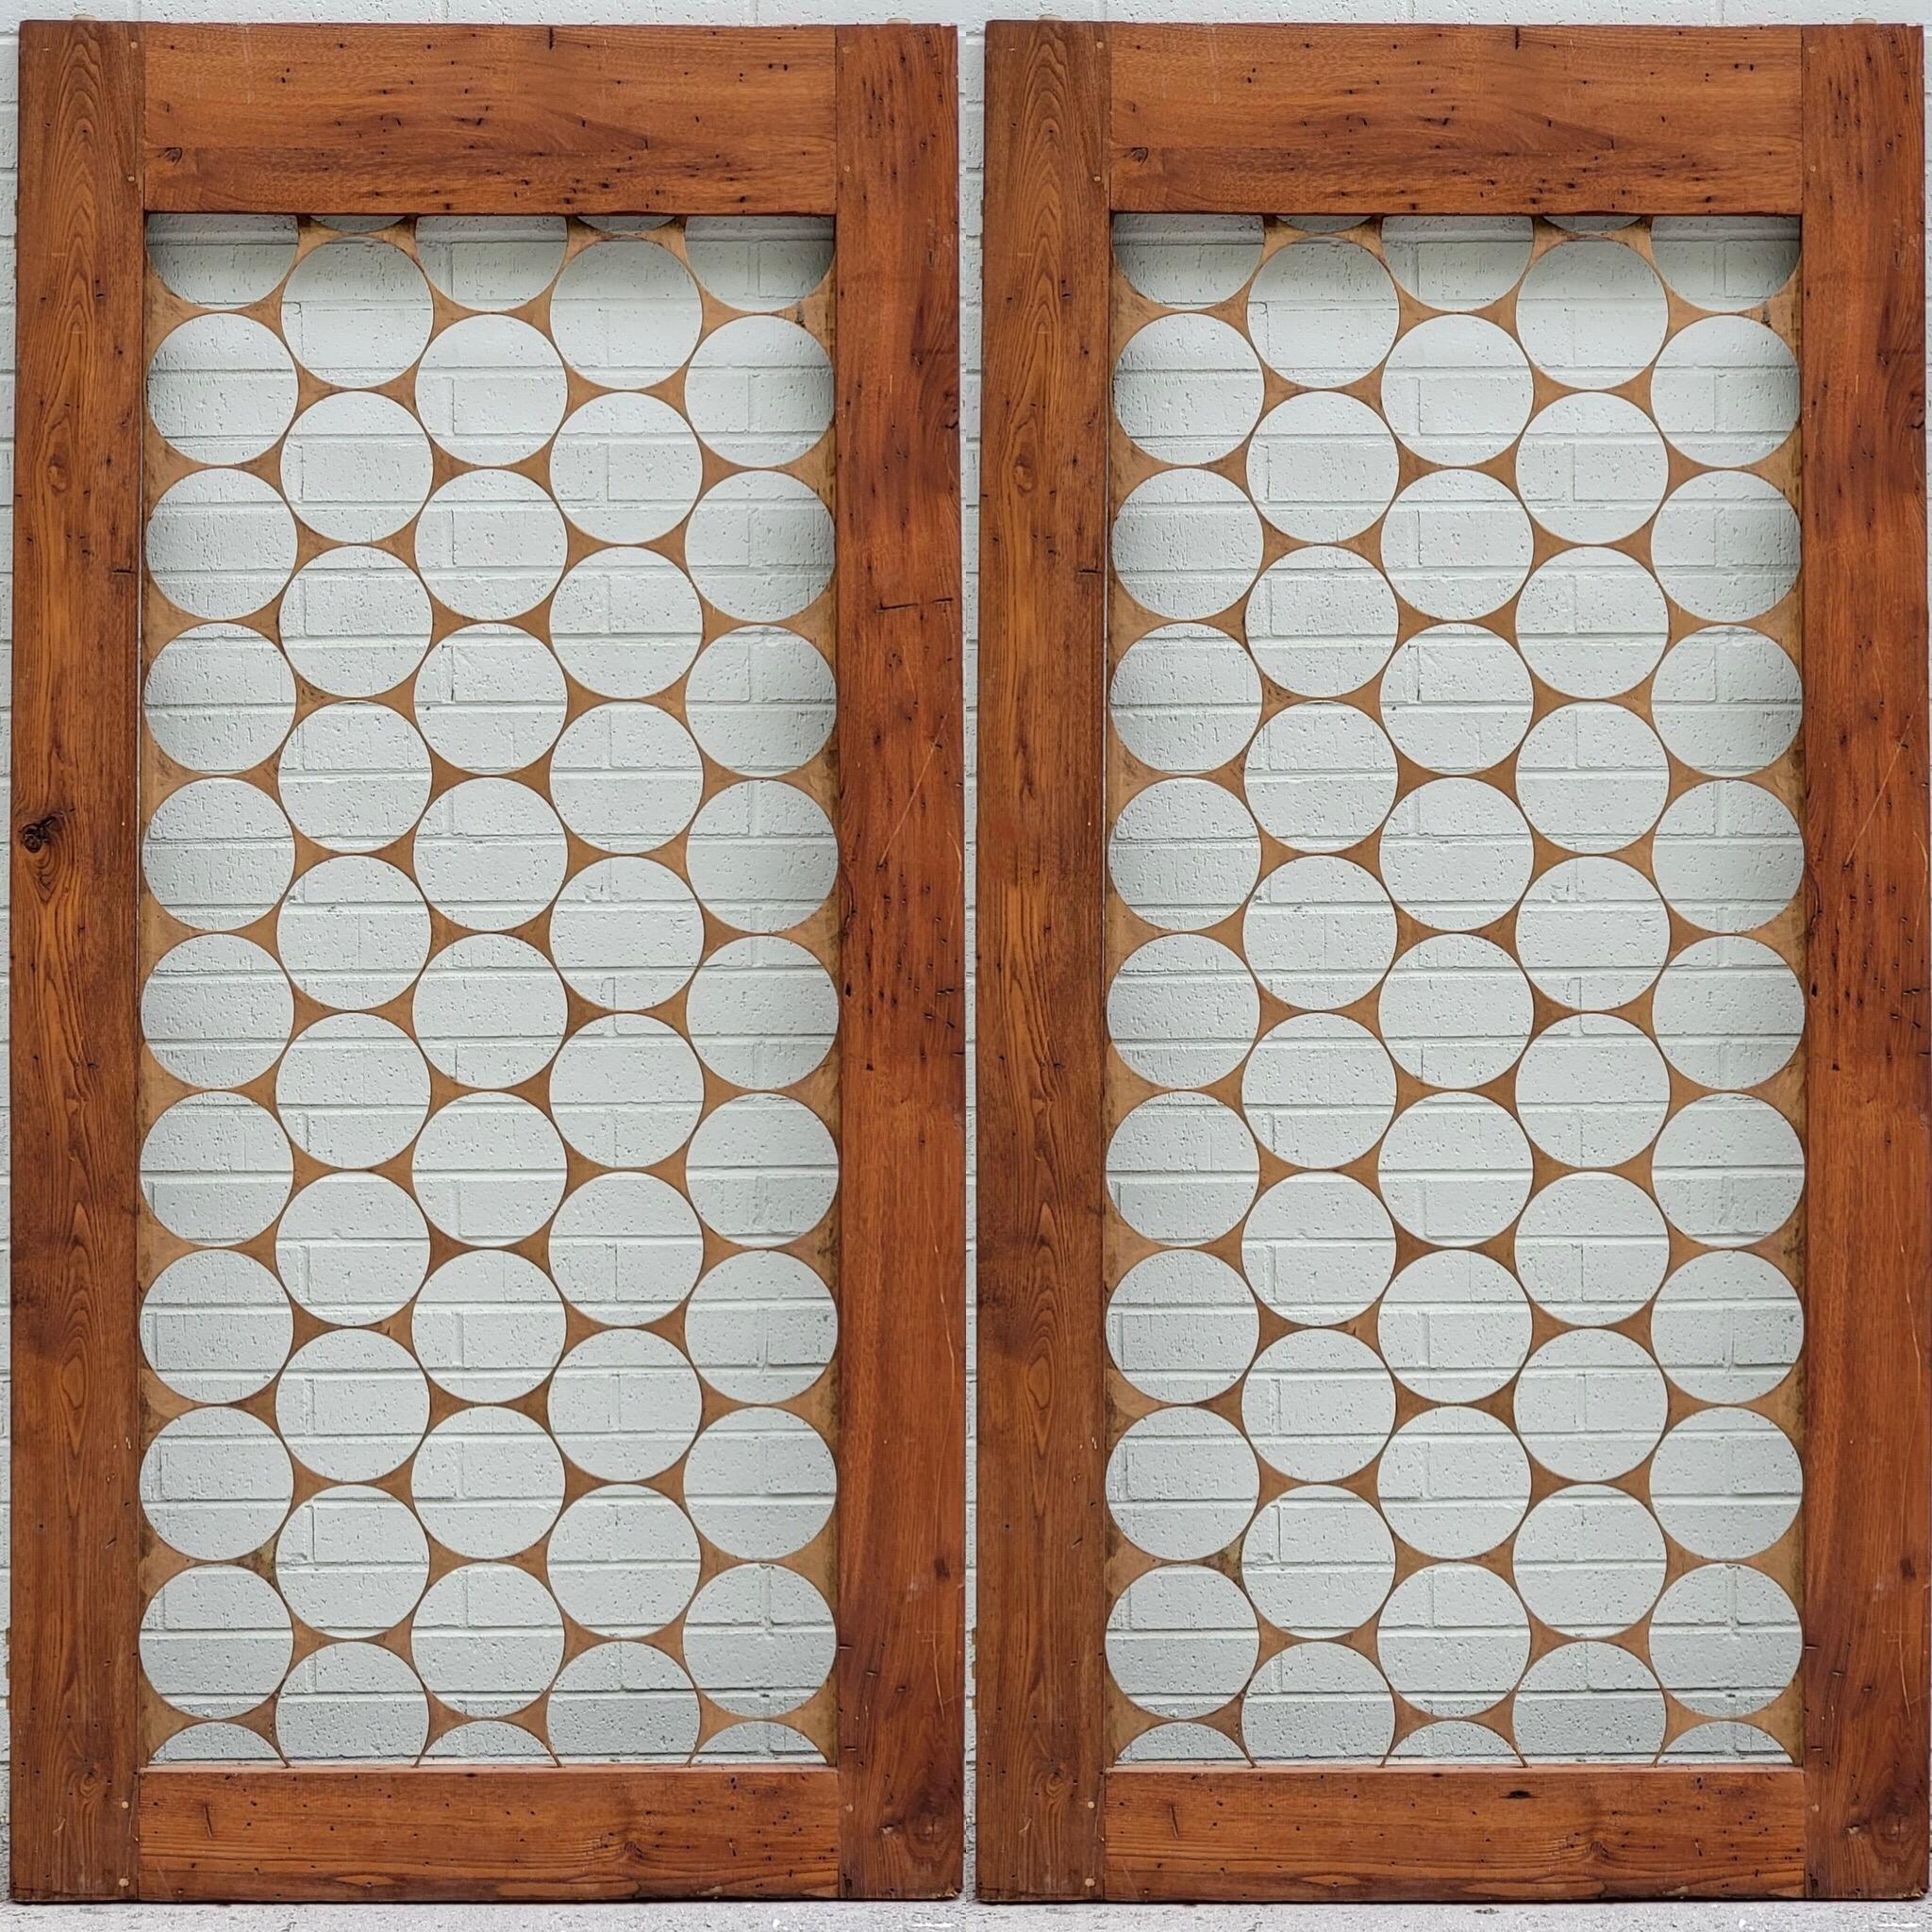 These are a special estate find out if Charleston! This is a pair of Mid-Century Modern wormy chestnut doors with gilded steel inset. They were in a prominent industrialist’s home for over 50 years….unused. Wormy chestnut is a rare wood too. It has